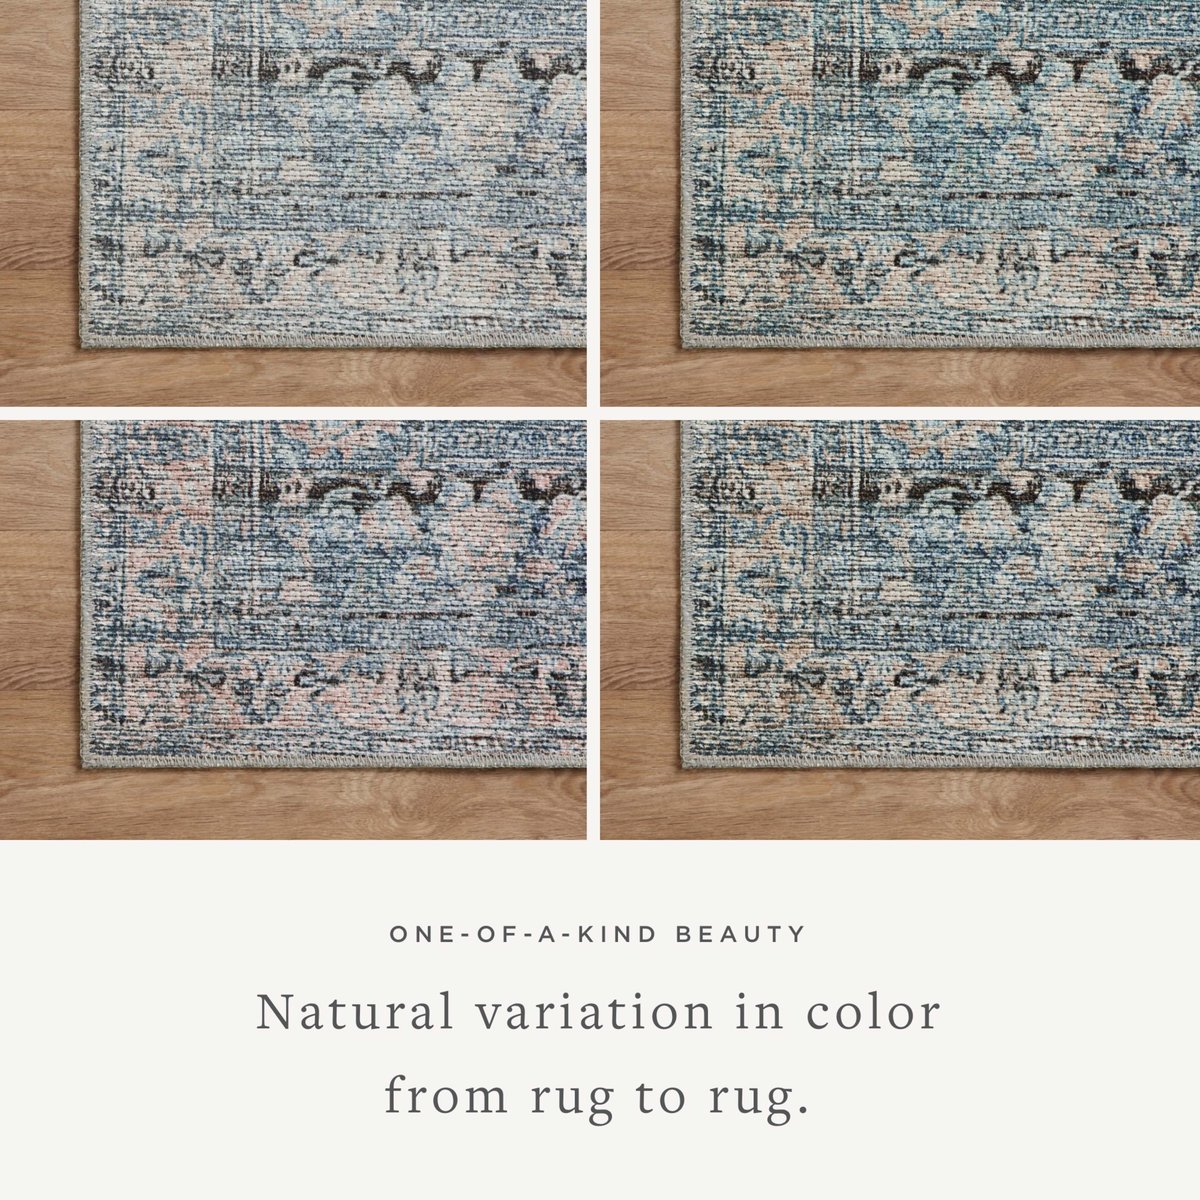 Amber Lewis x Loloi Billie BIL-05 Vintage / Overdyed Area Rugs